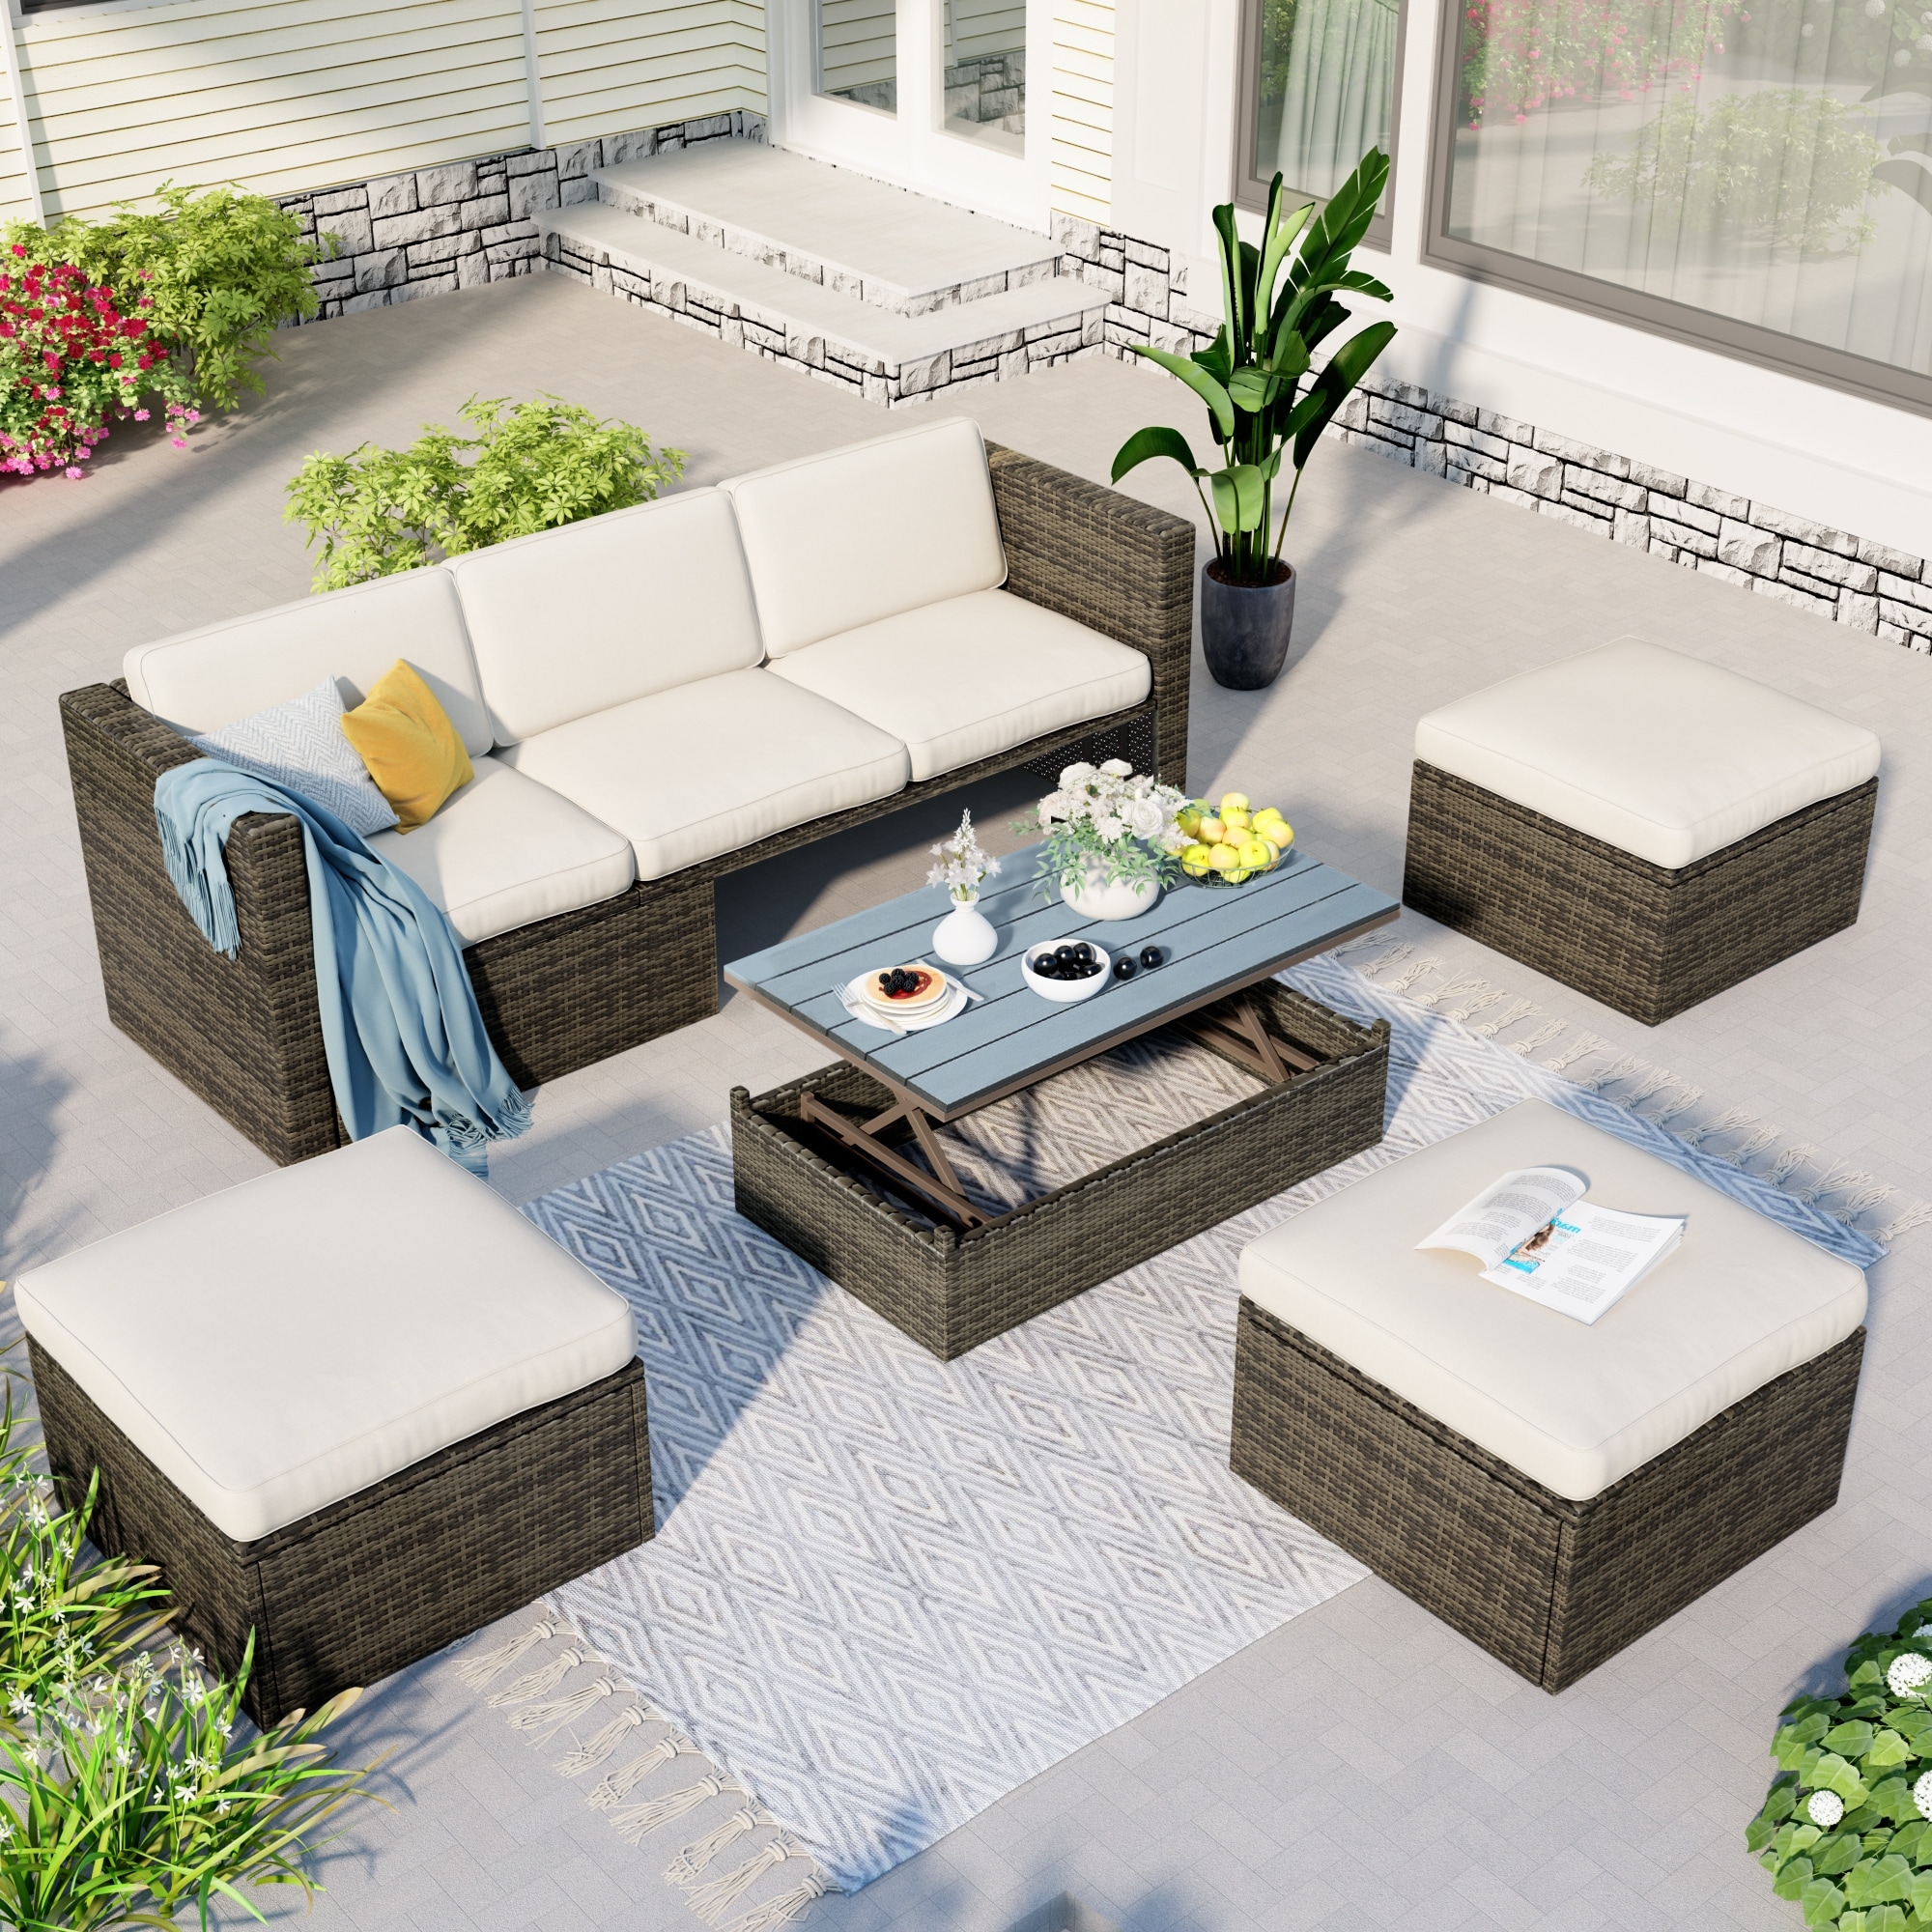 5-piece Patio Wicker Sofa Sets With Adustable Backrest And Lift Top Coffee Table